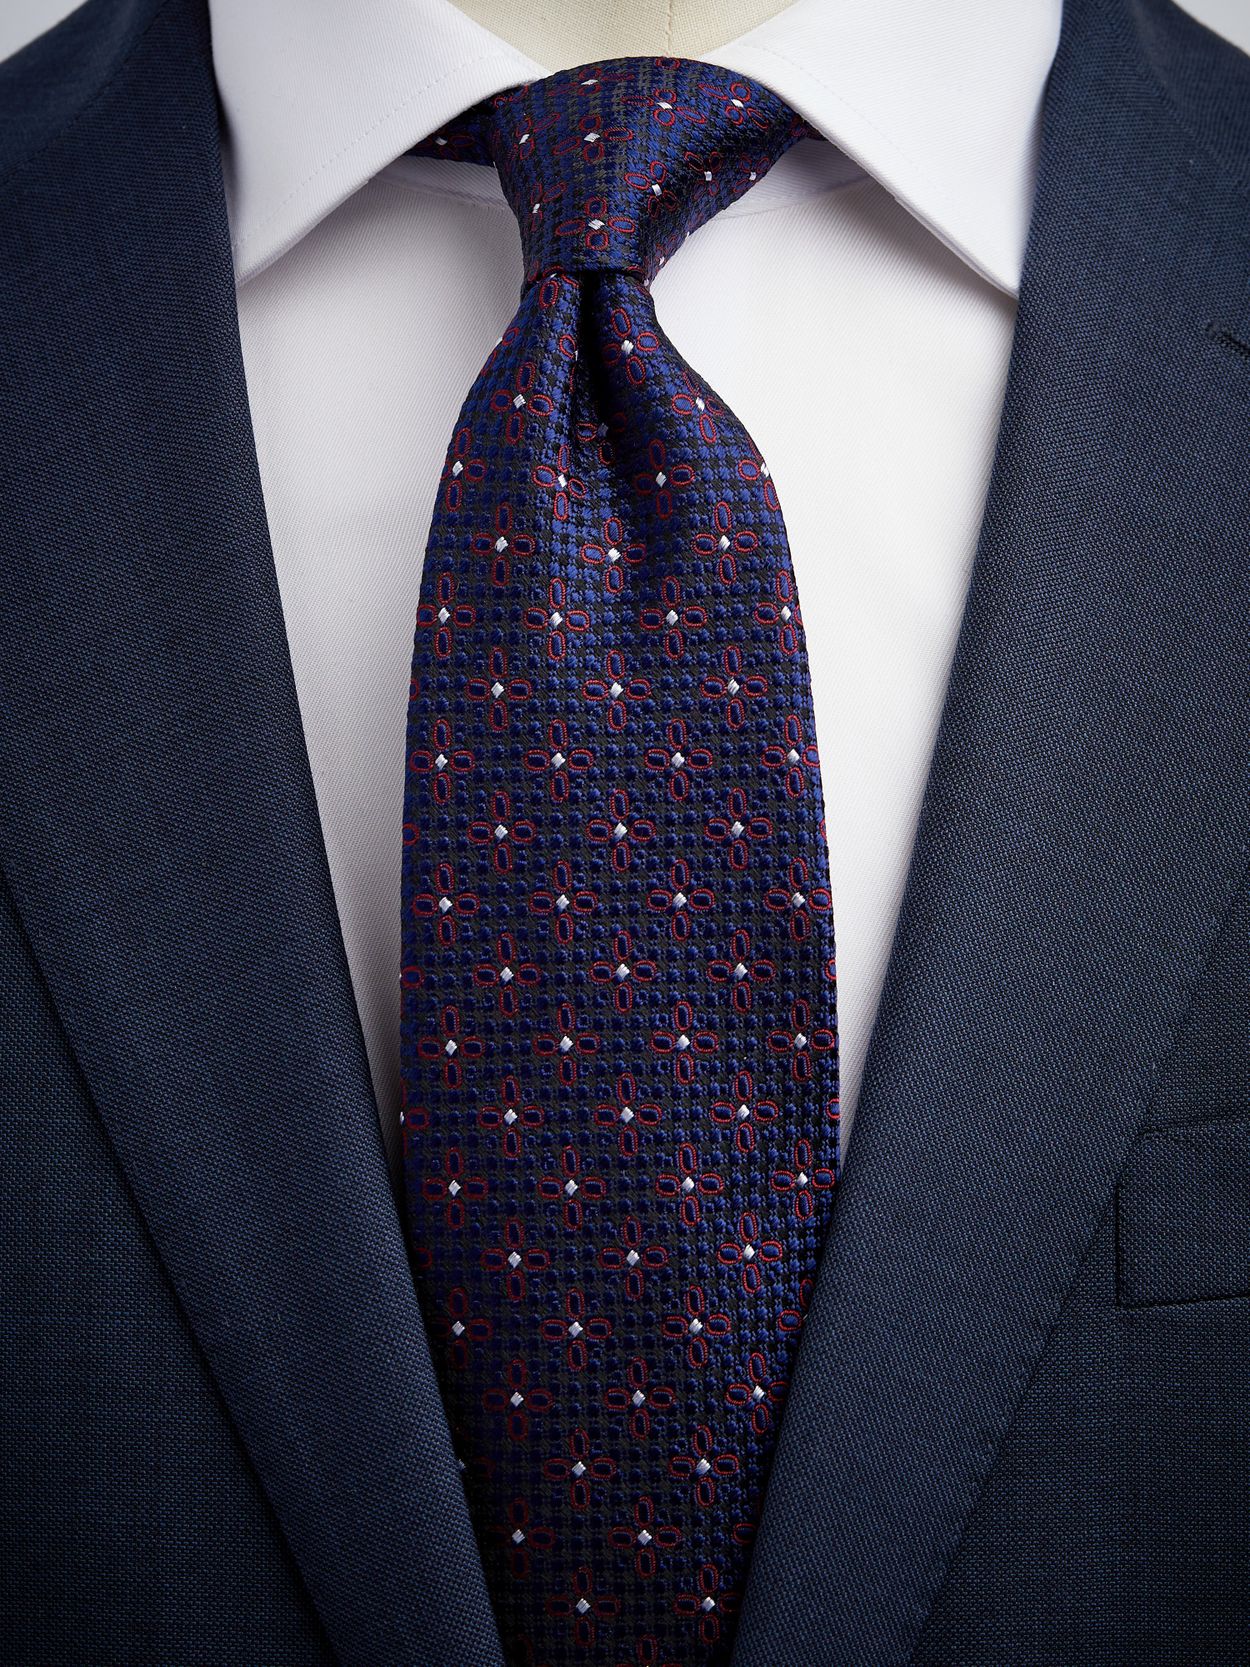 Blue & Red Tie Structure